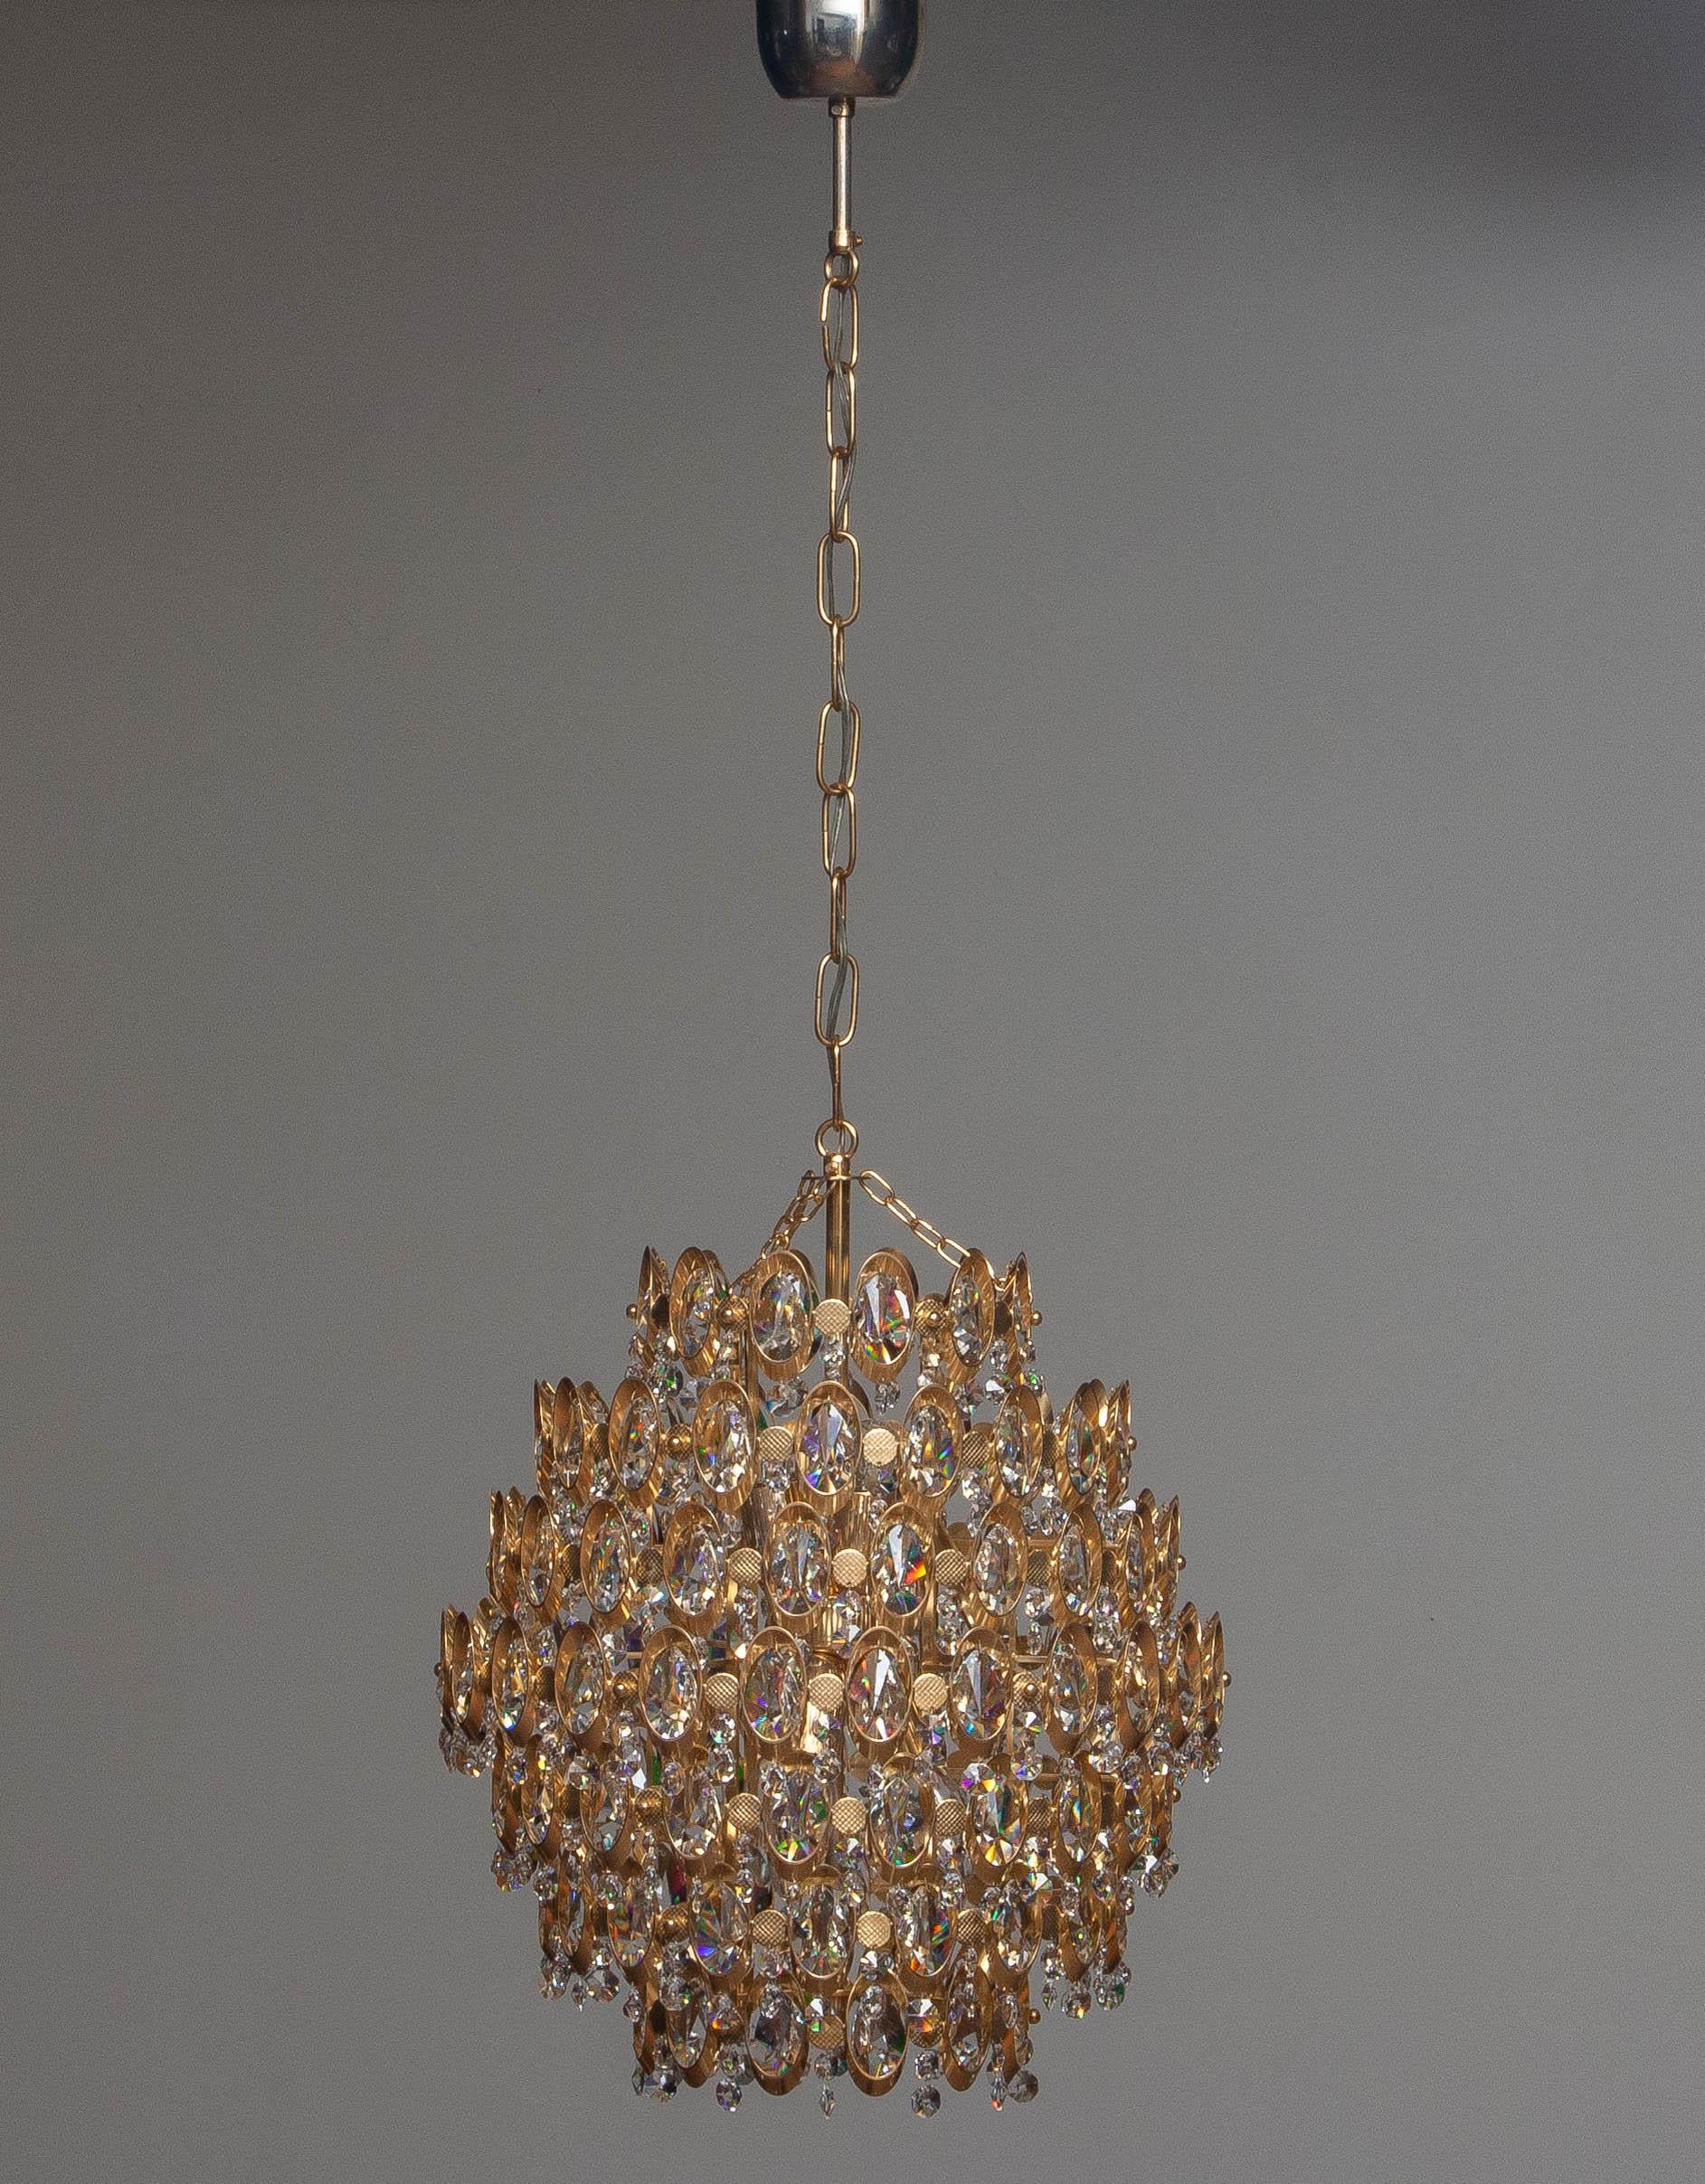 1970's Gilt Spherical Chandelier Filled with Clear Facet Crystals by Palwa In Good Condition For Sale In Silvolde, Gelderland